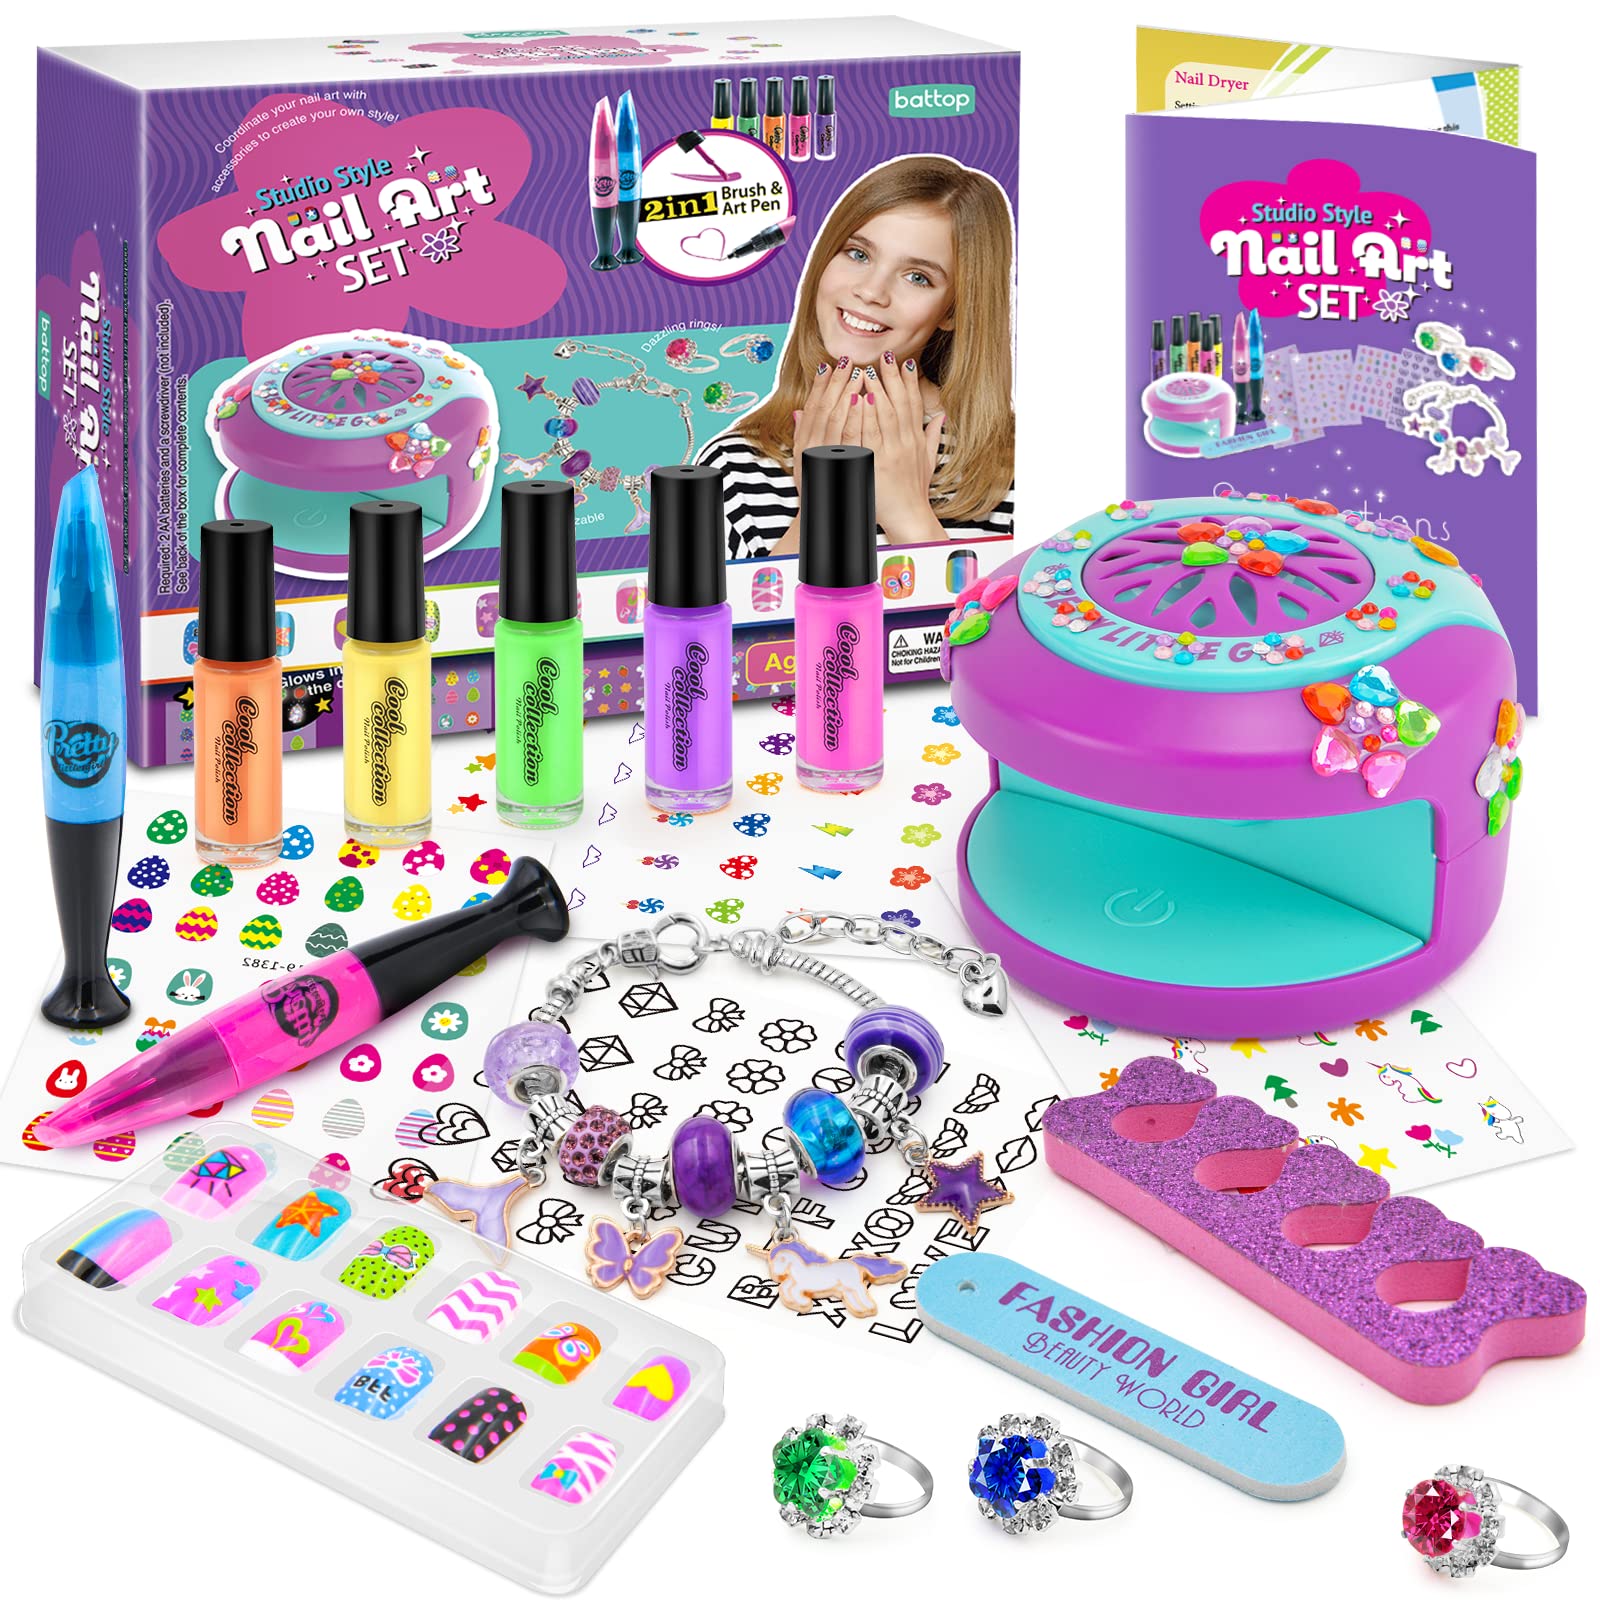  Kids Nail Polish Set for Girls - Nail Art Kit for kids Ages  7-12 - Girl Gifts - Non Toxic Nail Polish,Girls stuff for  Spa,Makeup,Manicure,Birthday Gifts for Girl Age 6